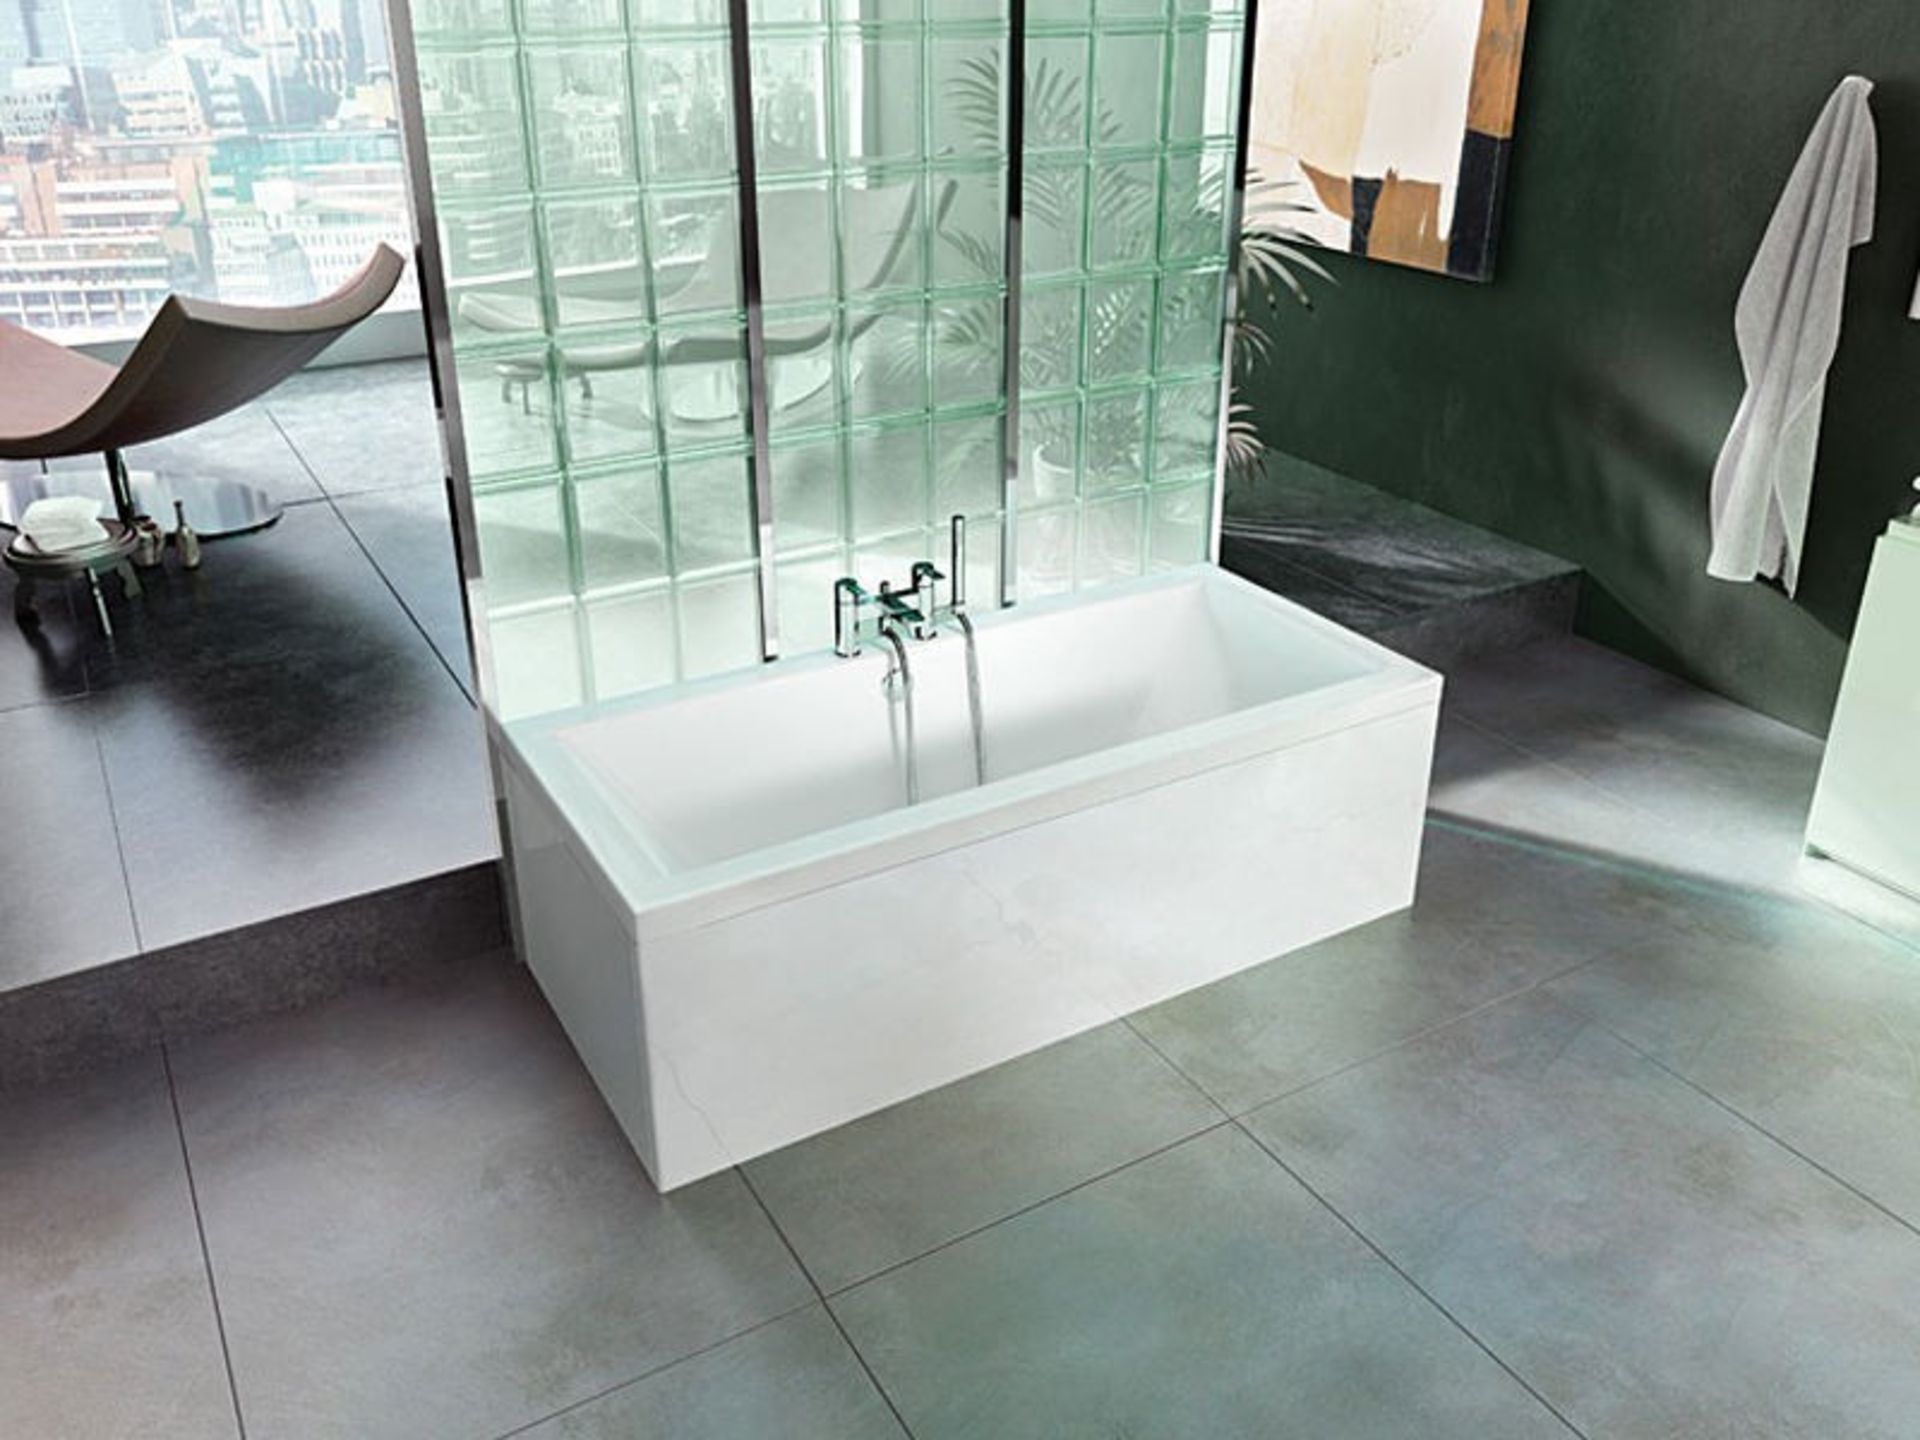 Twyford INDULGENCE 1700x750mm Rectangular Bath. White. RRP £938.99.Comes complete with side ...